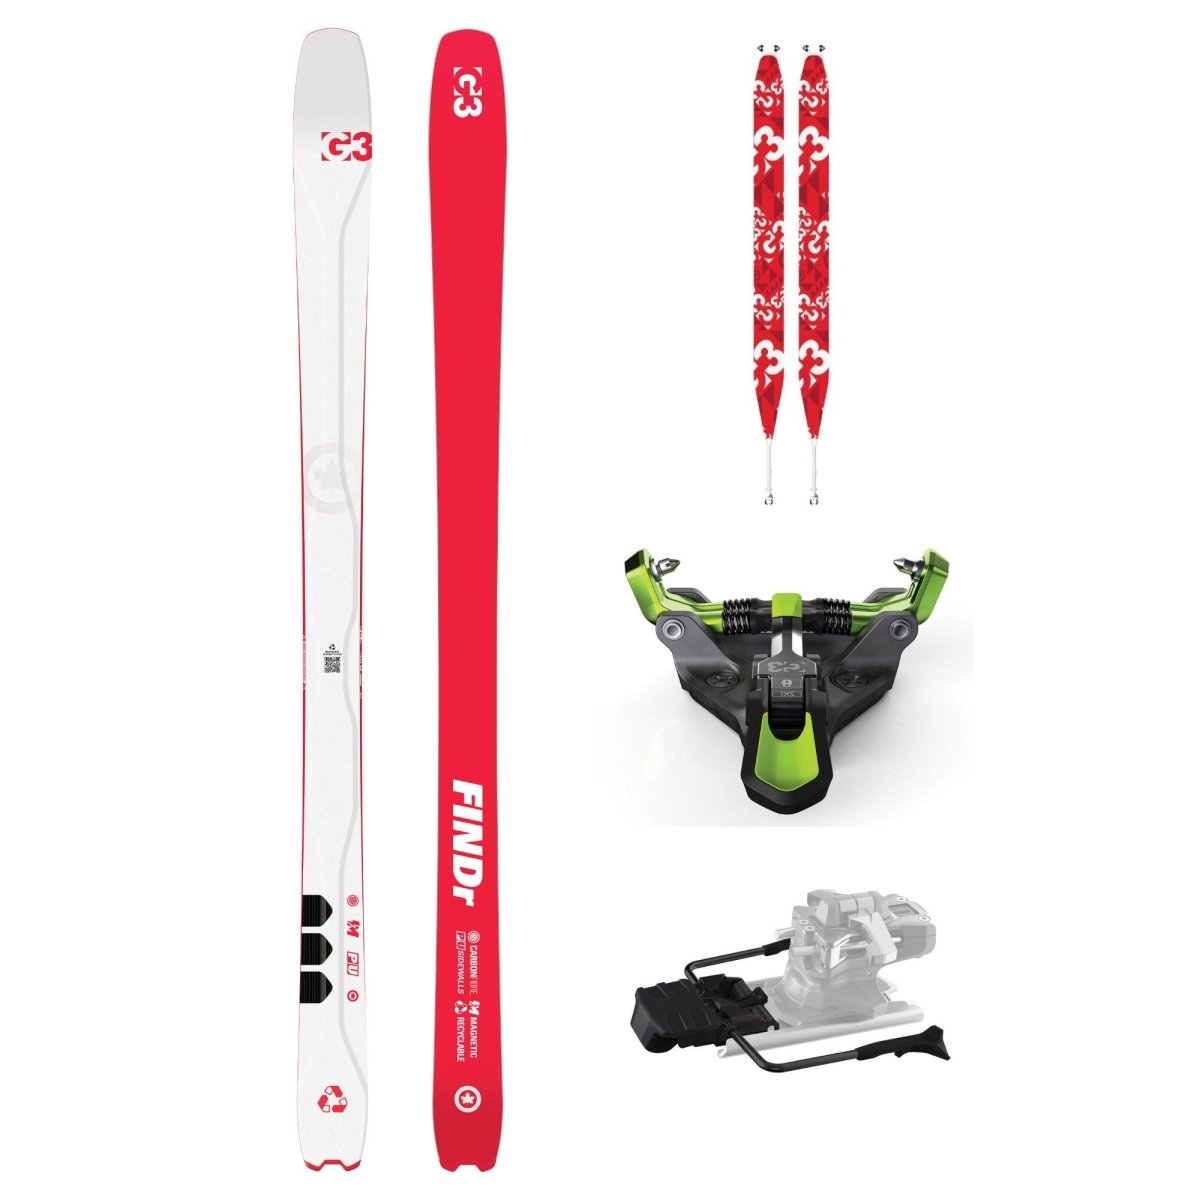 FINDr R3 94 Kit - Skis - G3 Store Canada